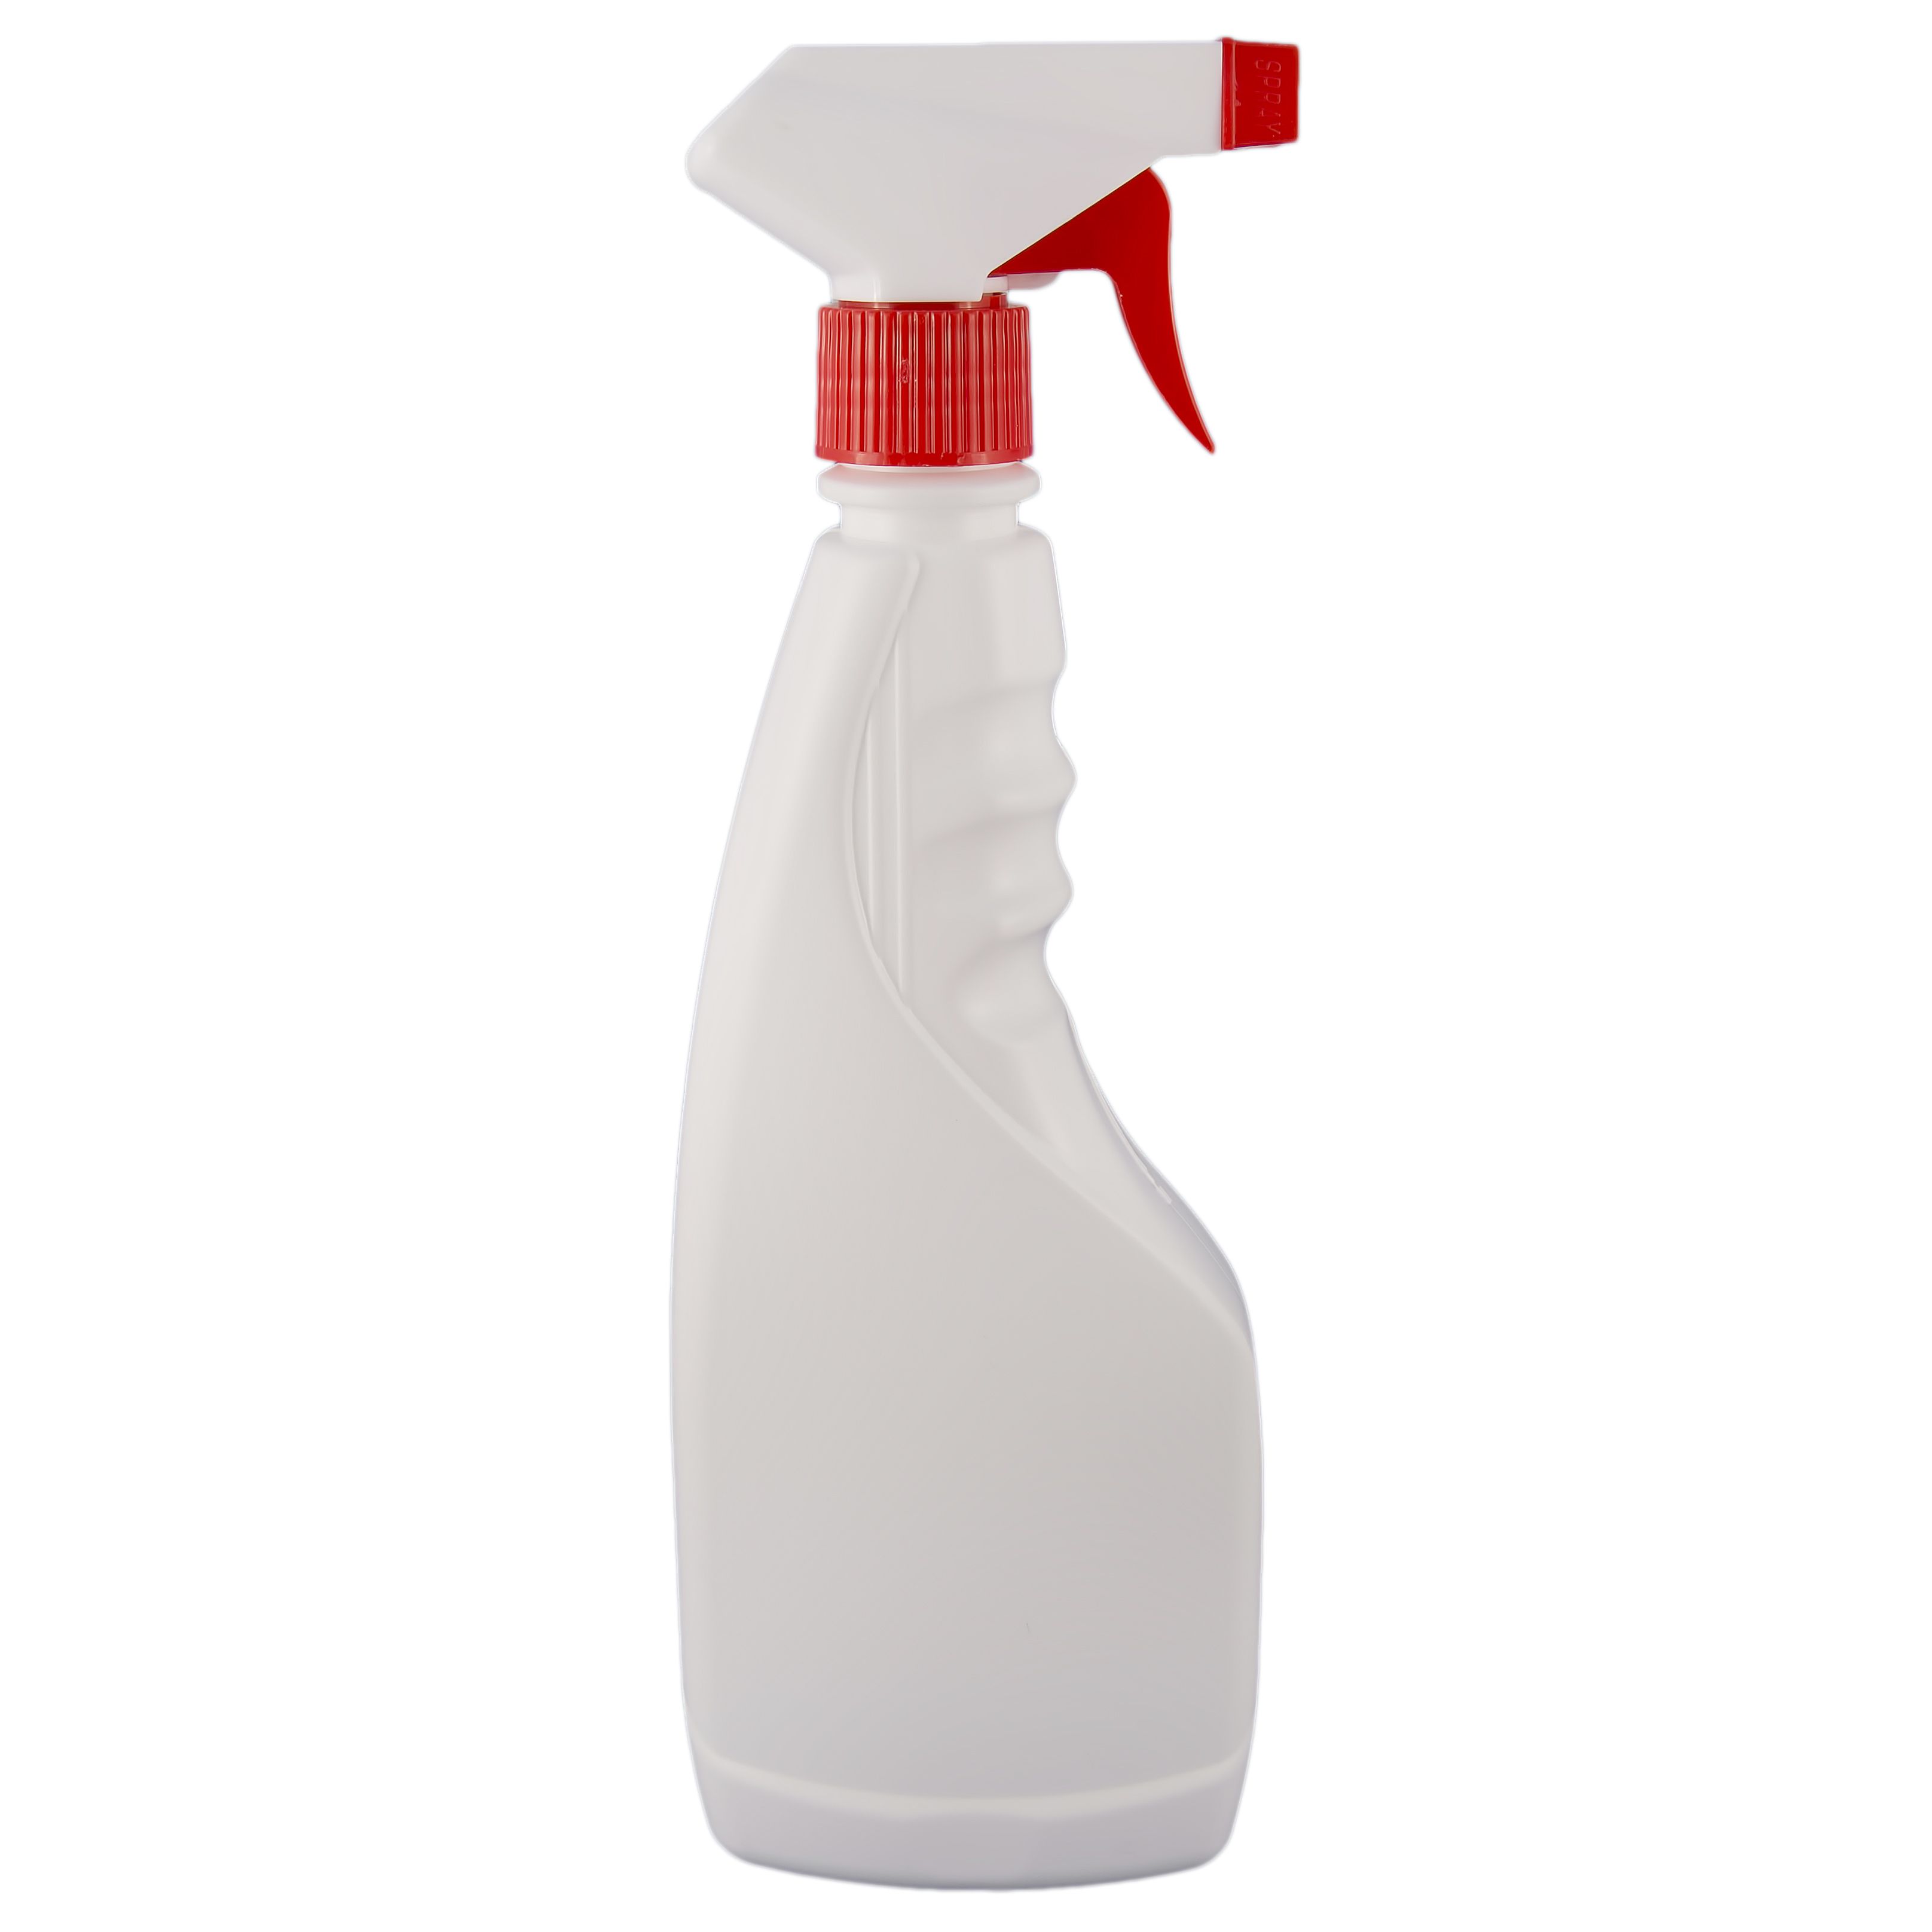 The 500 ml HDPE bottle Trigger 500 is perfect choice for any product in household chemicals. by Pack Store Europe, packstore.eu